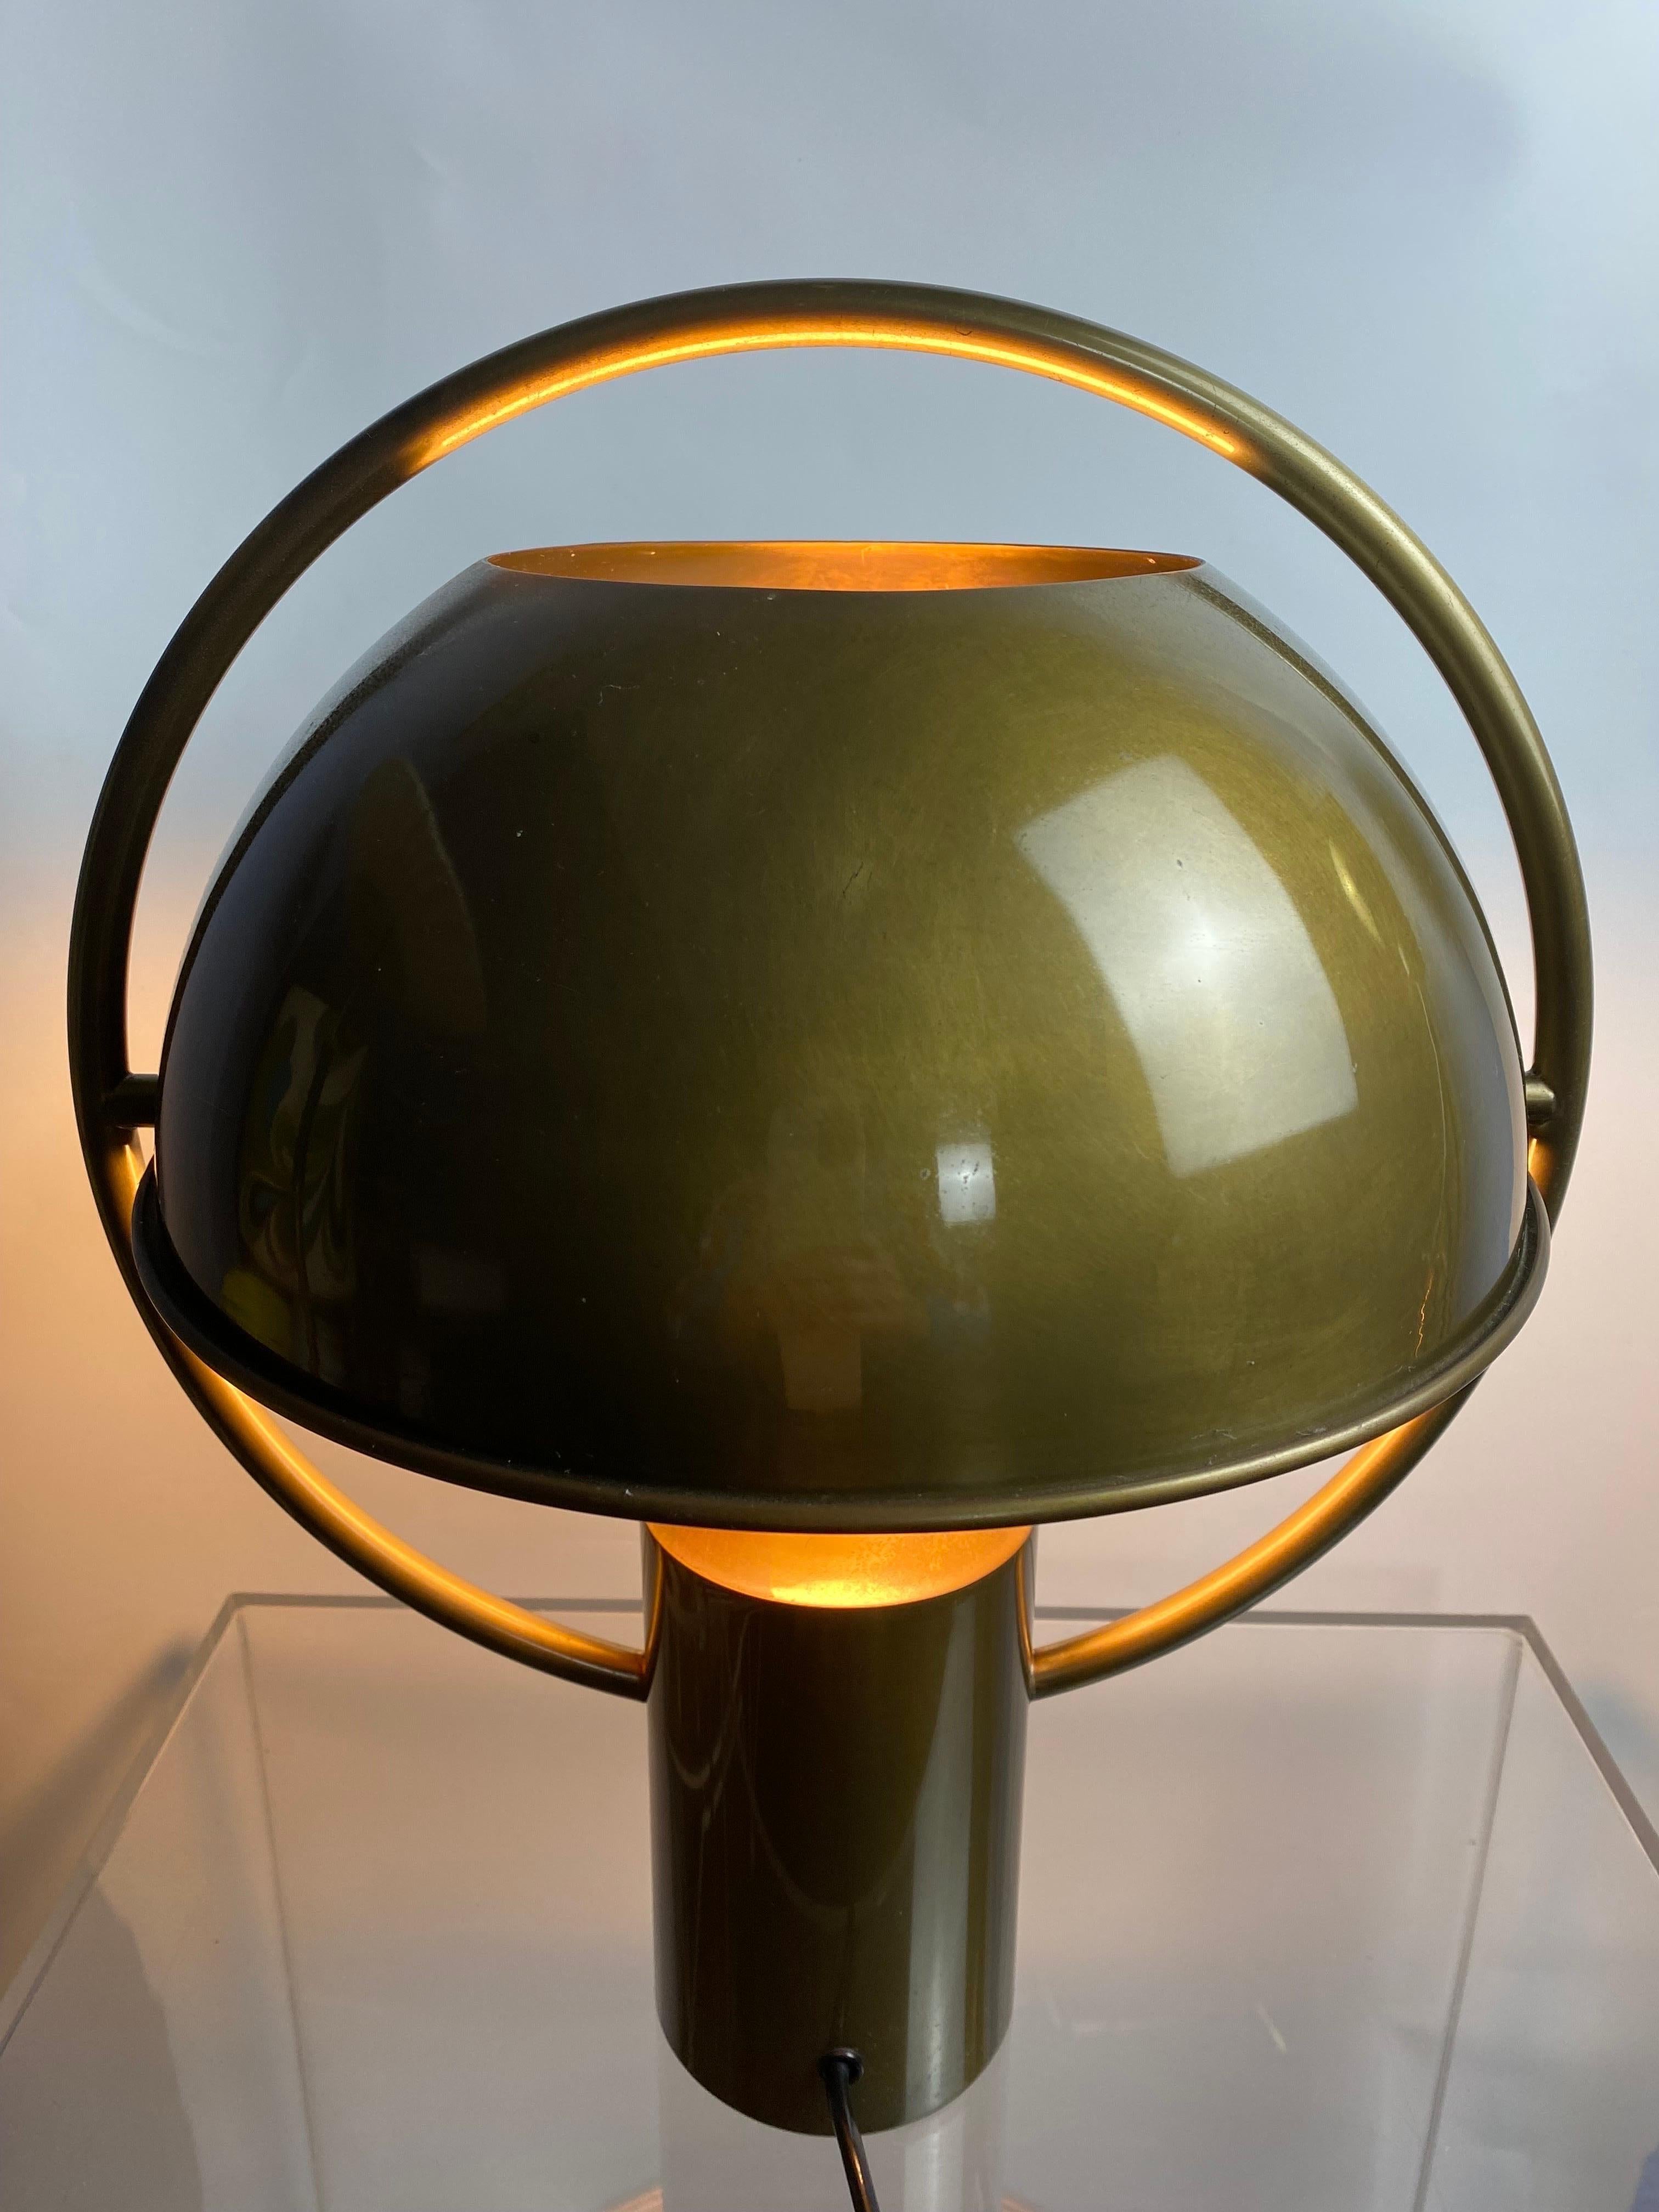 Rare German Midcentury Table Lamp in Solid Brass by Günter&Florian Schulz 1970s For Sale 6